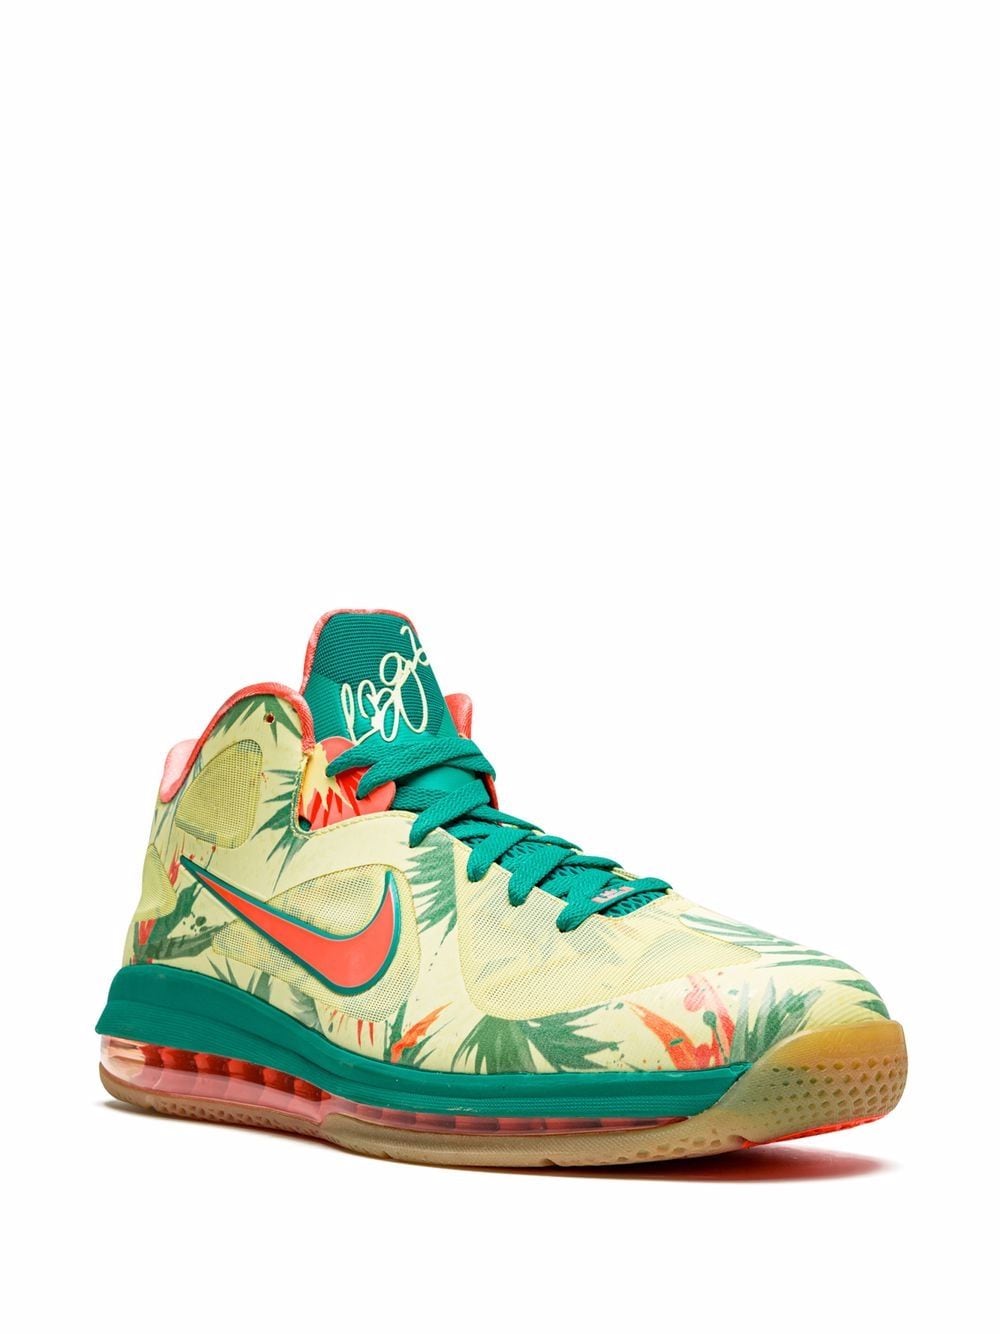 Image 2 of Nike LeBron 9 Low "Arnold Palmer" sneakers